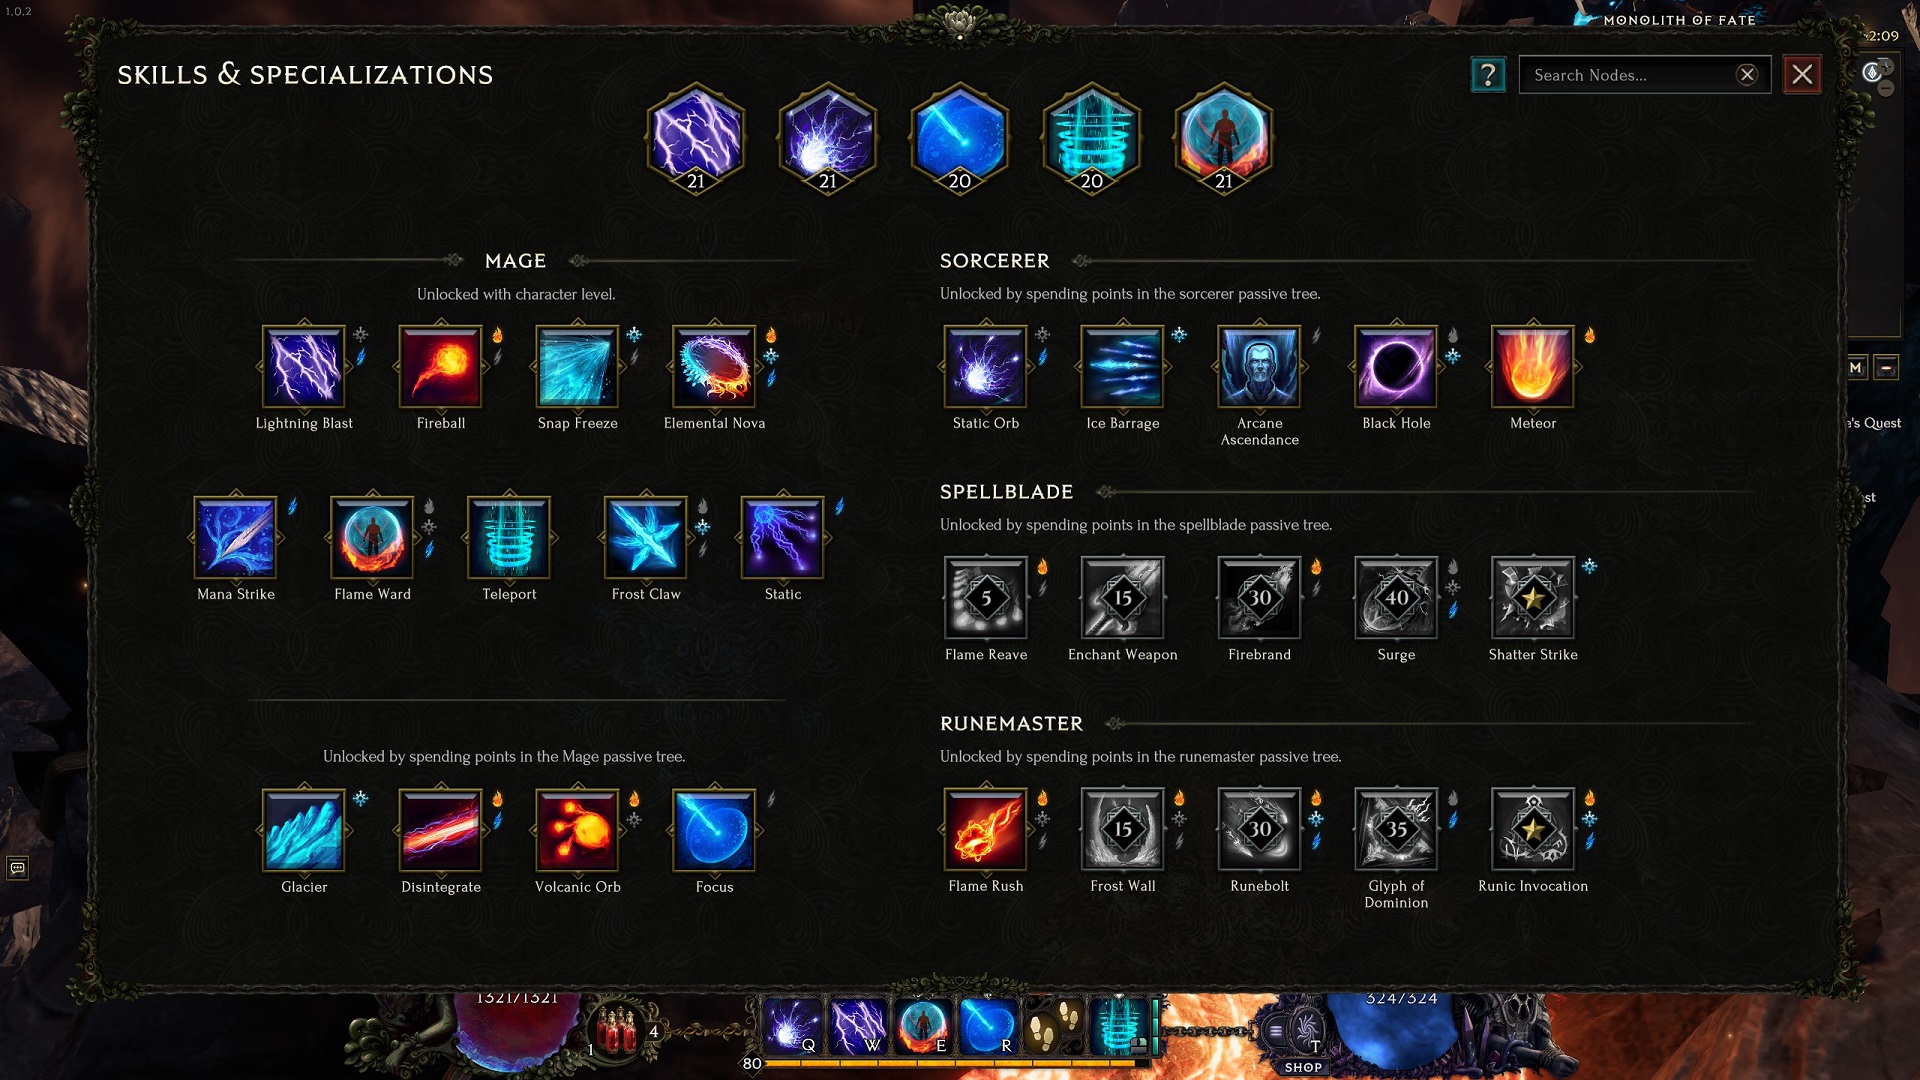 An image of the Mage's skills in Last Epoch.